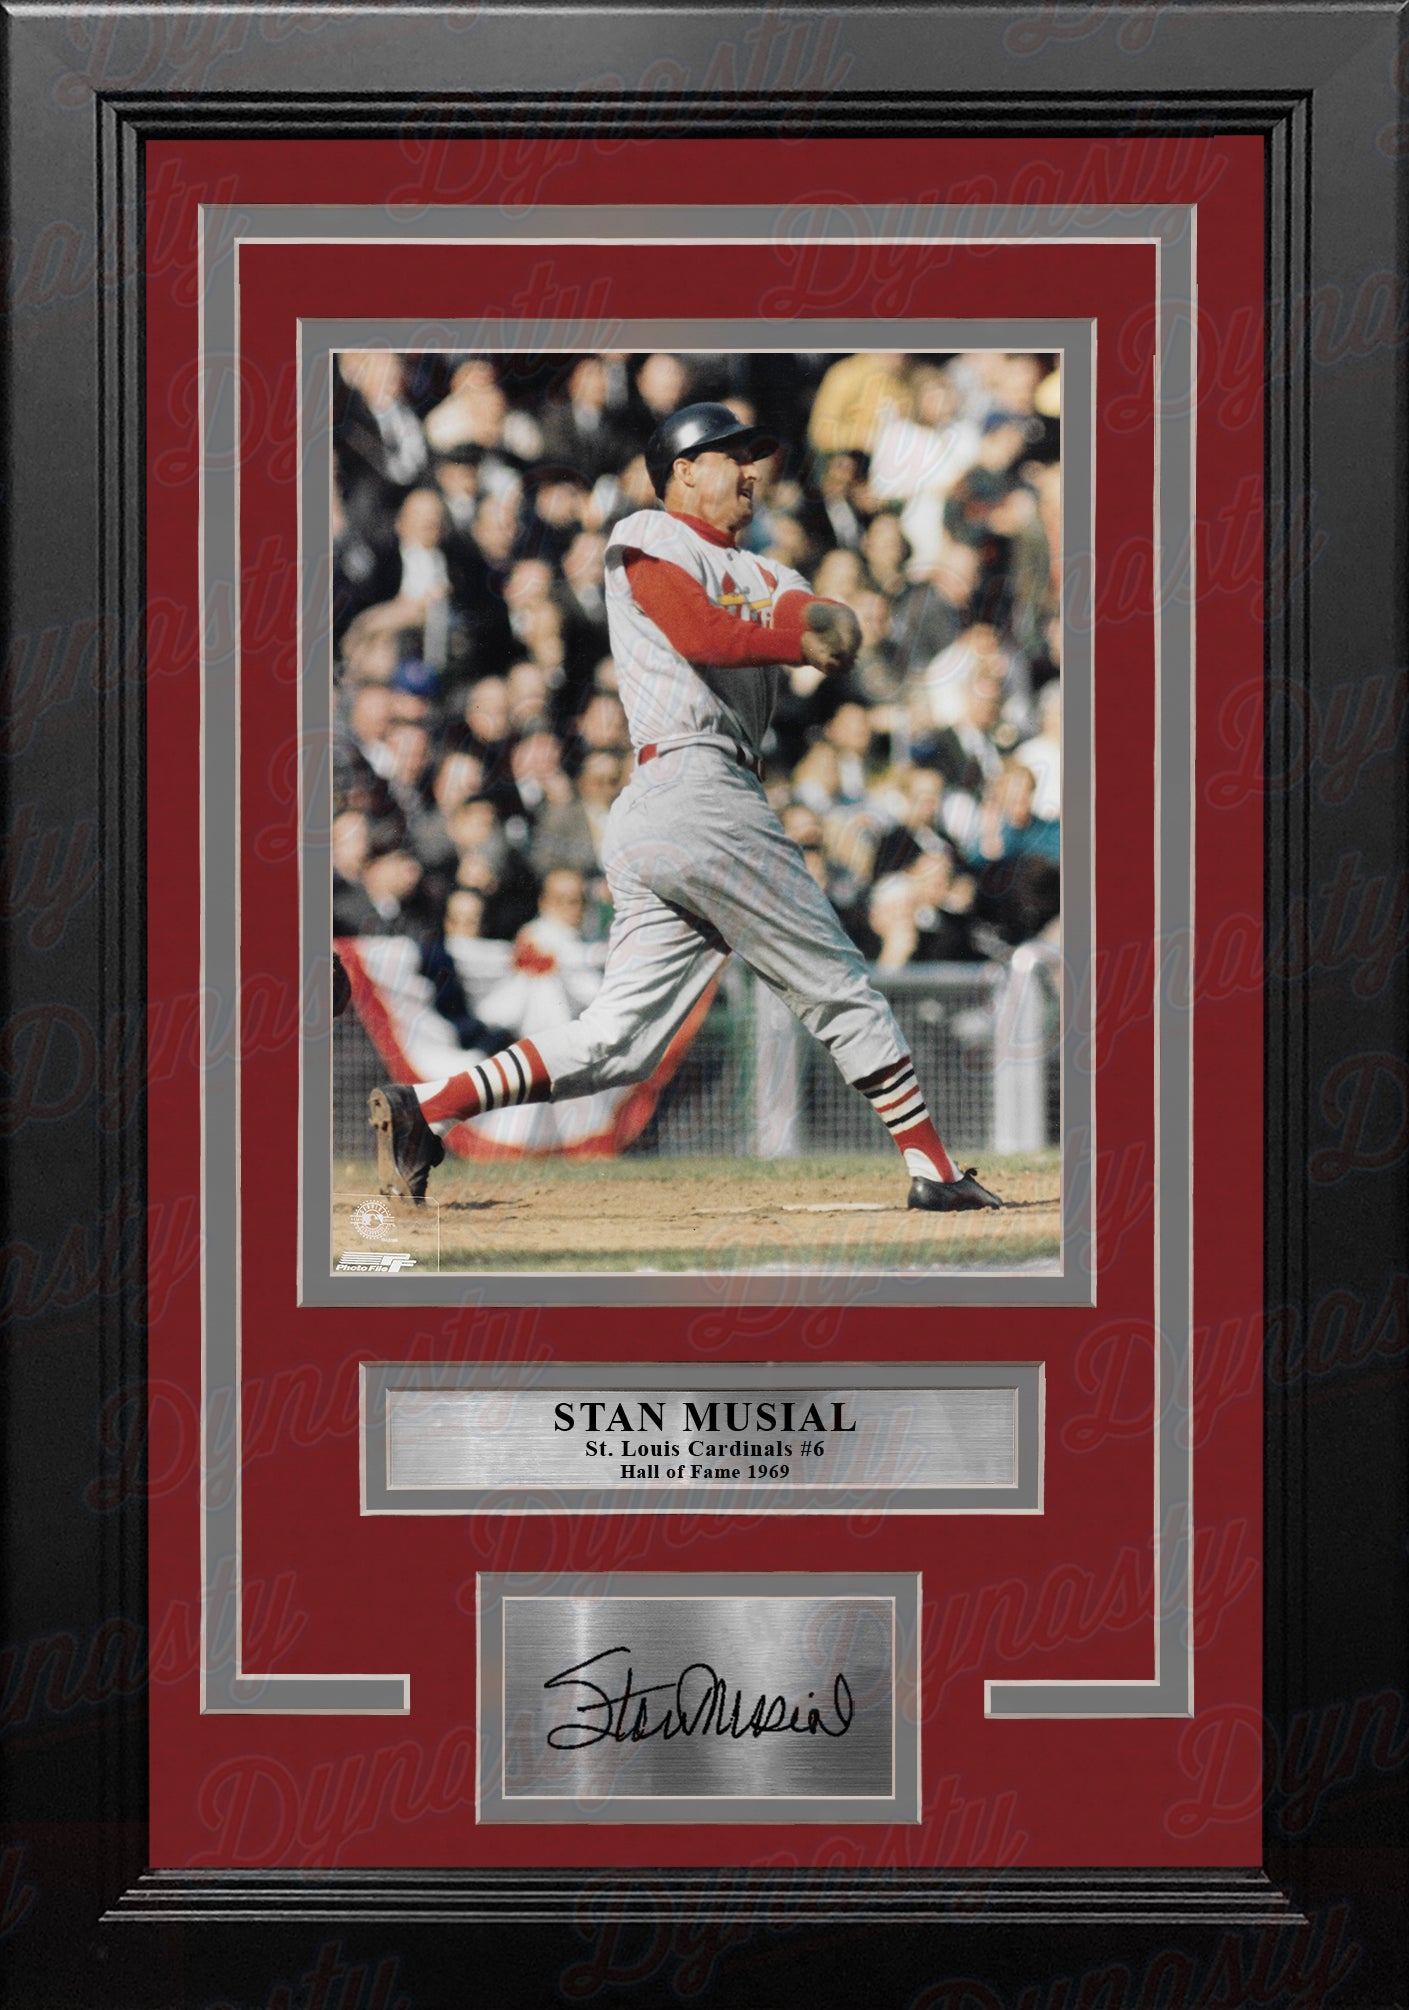 Stan Musial in Action St. Louis Cardinals 8" x 10" Framed Baseball Photo with Engraved Autograph - Dynasty Sports & Framing 